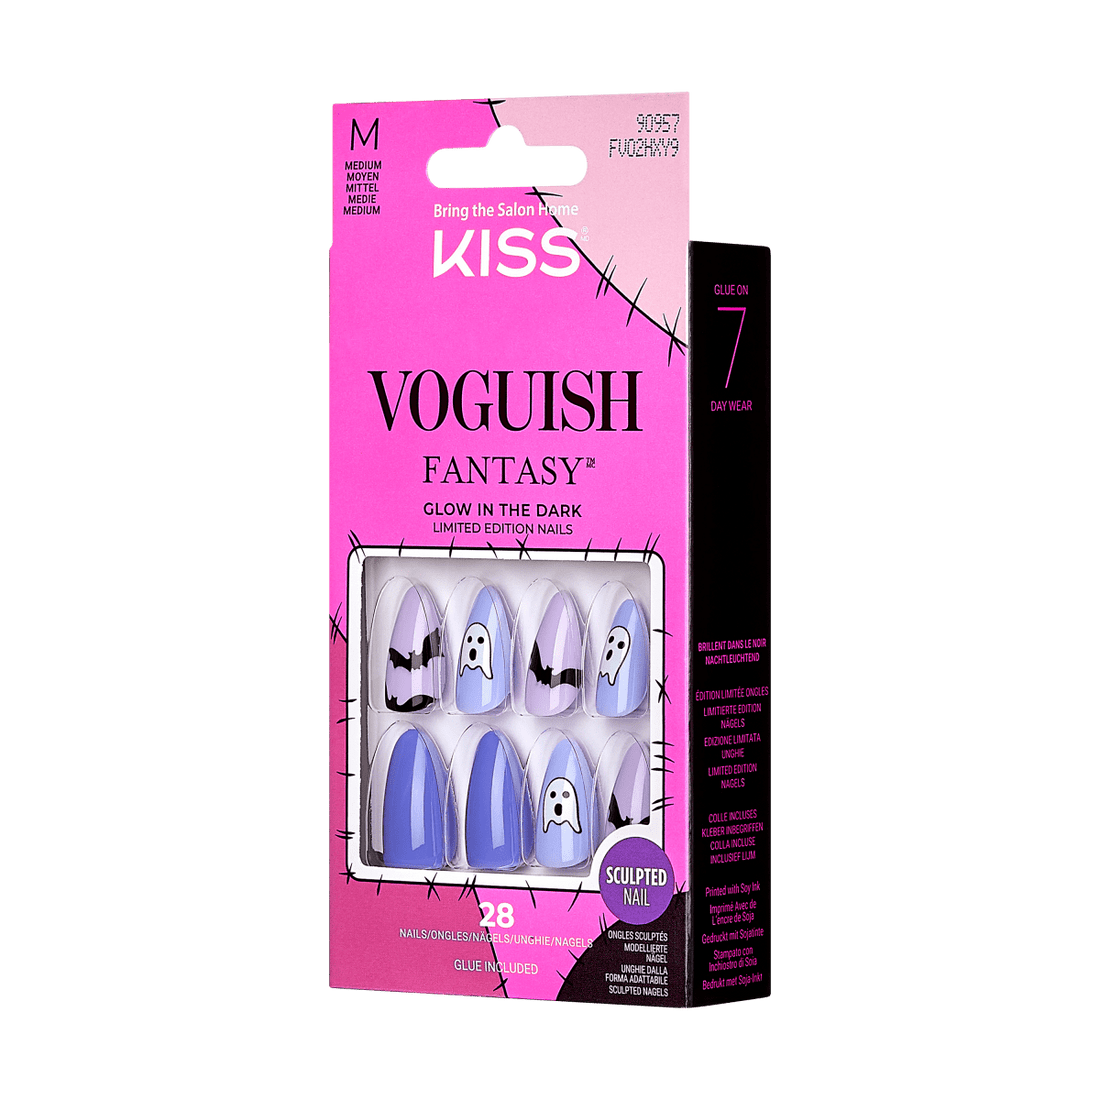 KISS Voguish Fantasy, Press-On Nails, After Midnight, Purple, Med Almond, 28ct